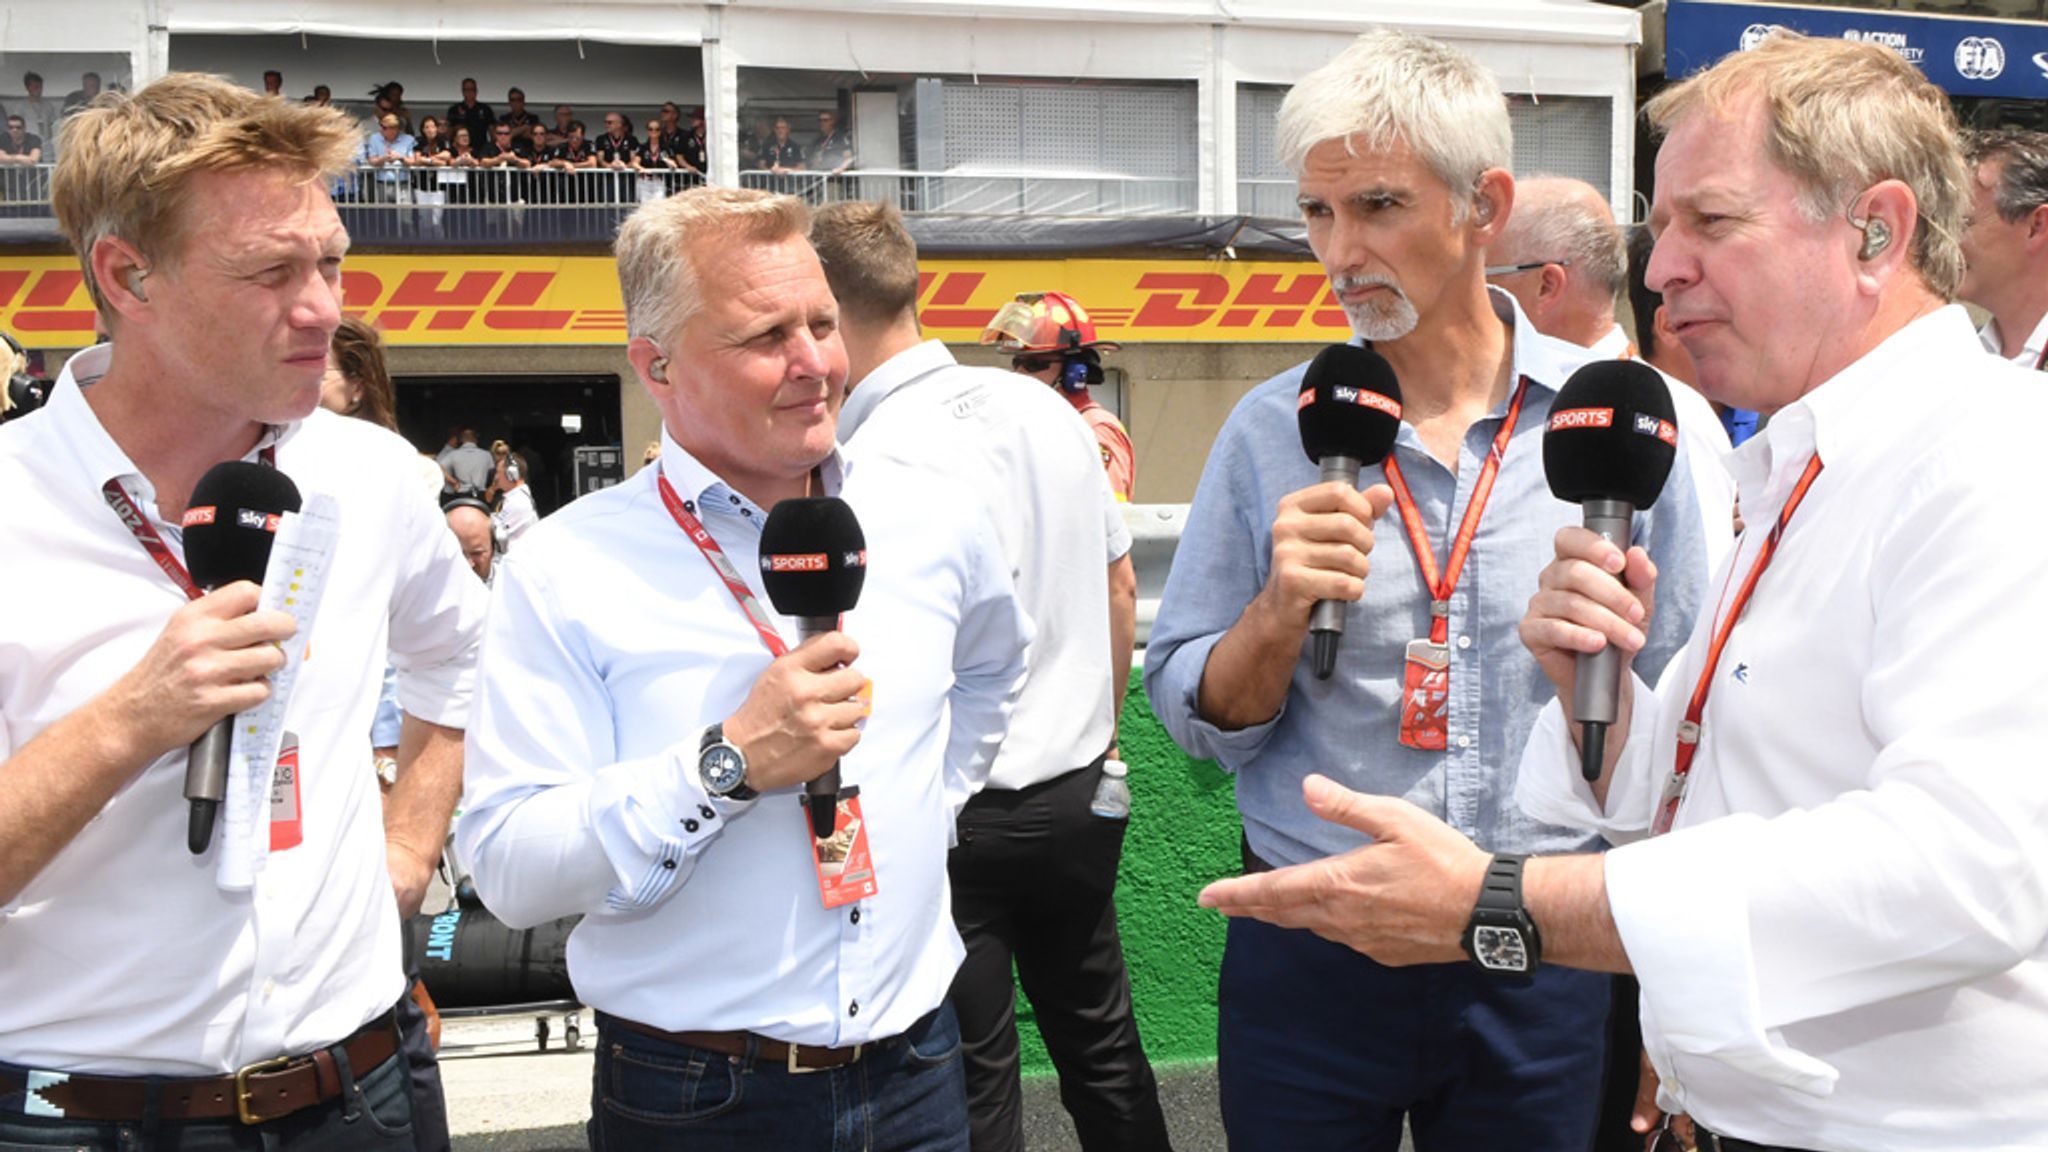 Sky F1 in 2018 The new shows and features for the upcoming season F1 News